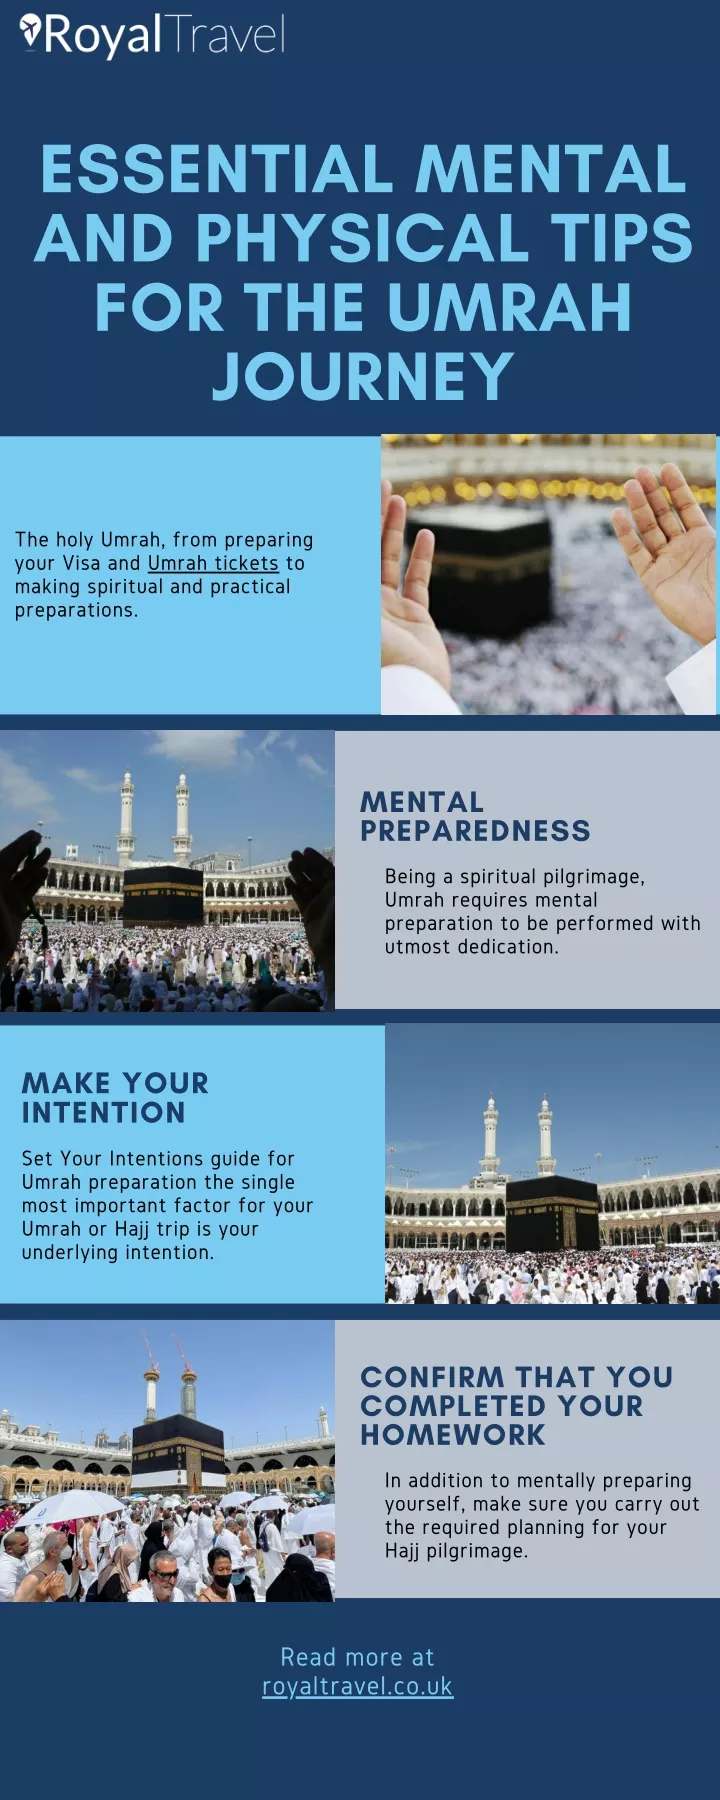 essential mental and physical tips for the umrah